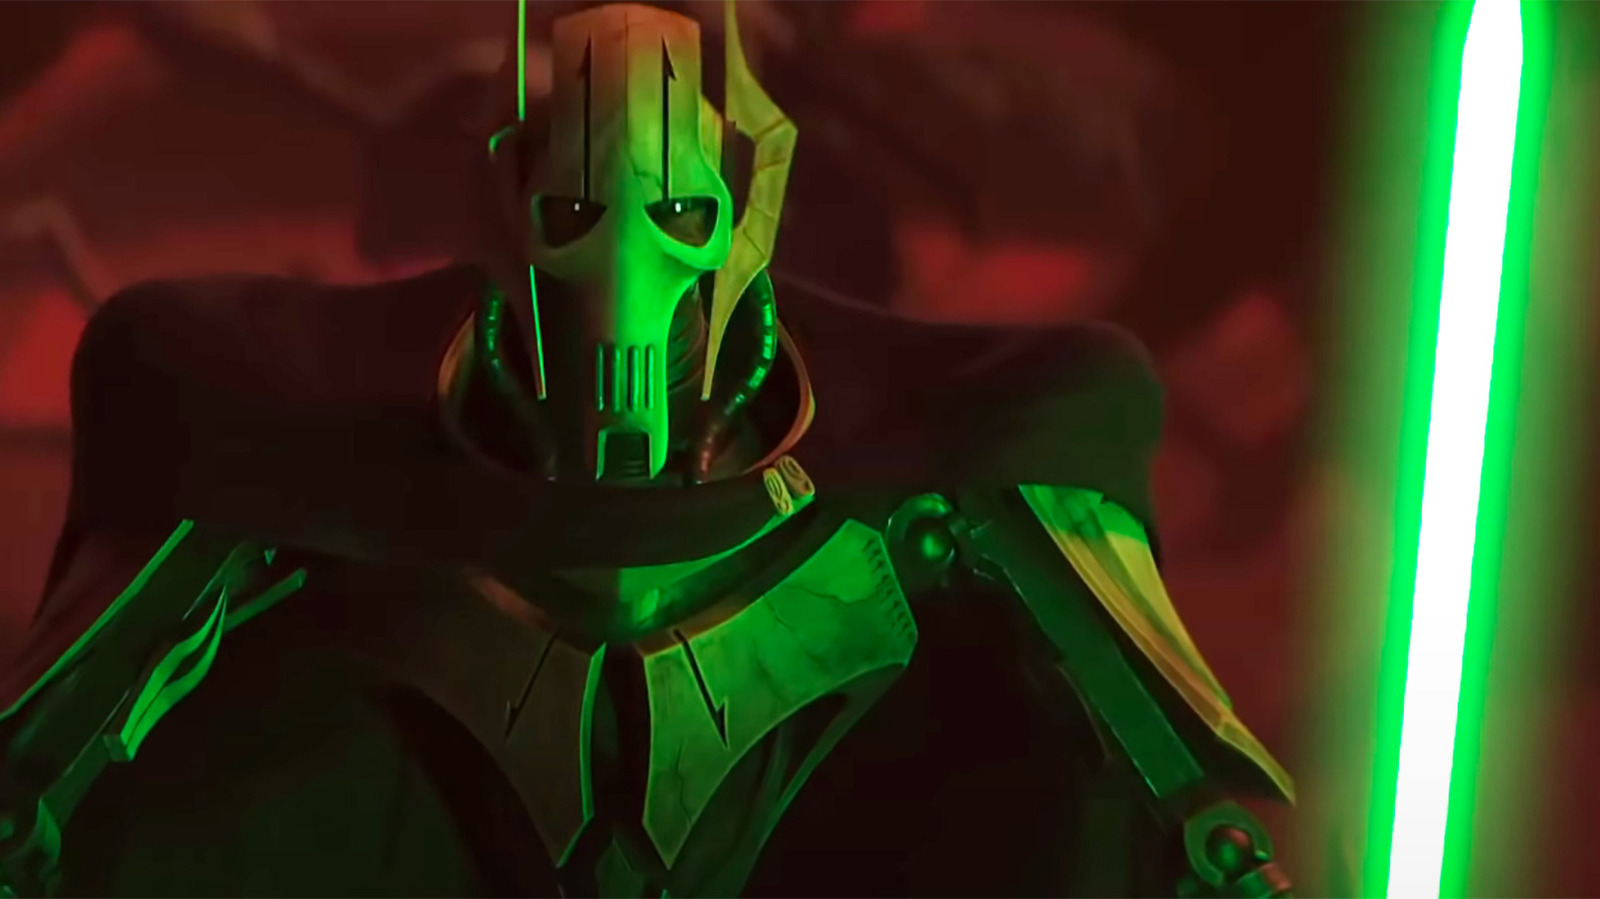 Tales Of The Empire Makes General Grievous Part Of Another Villain’s Tragic Origins